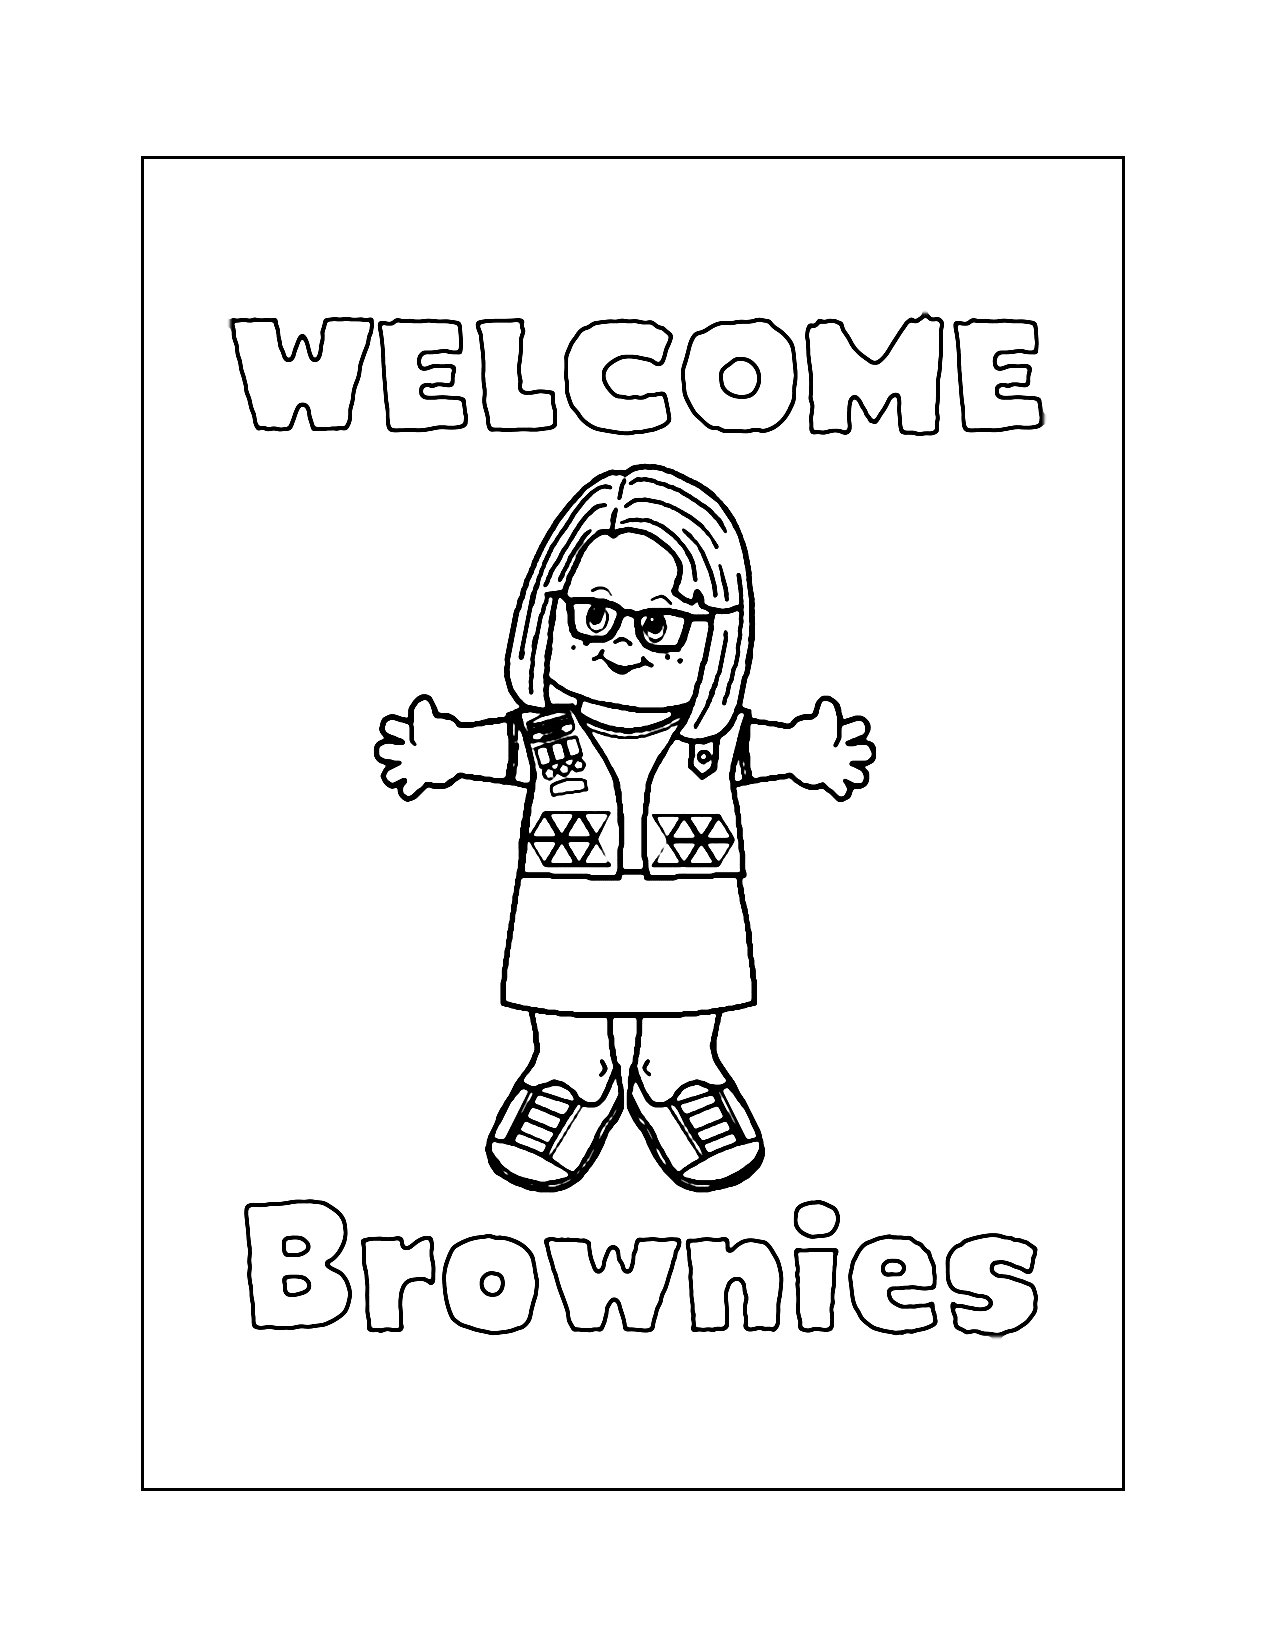 Welcome Brownies Girl Scout Coloring Pages